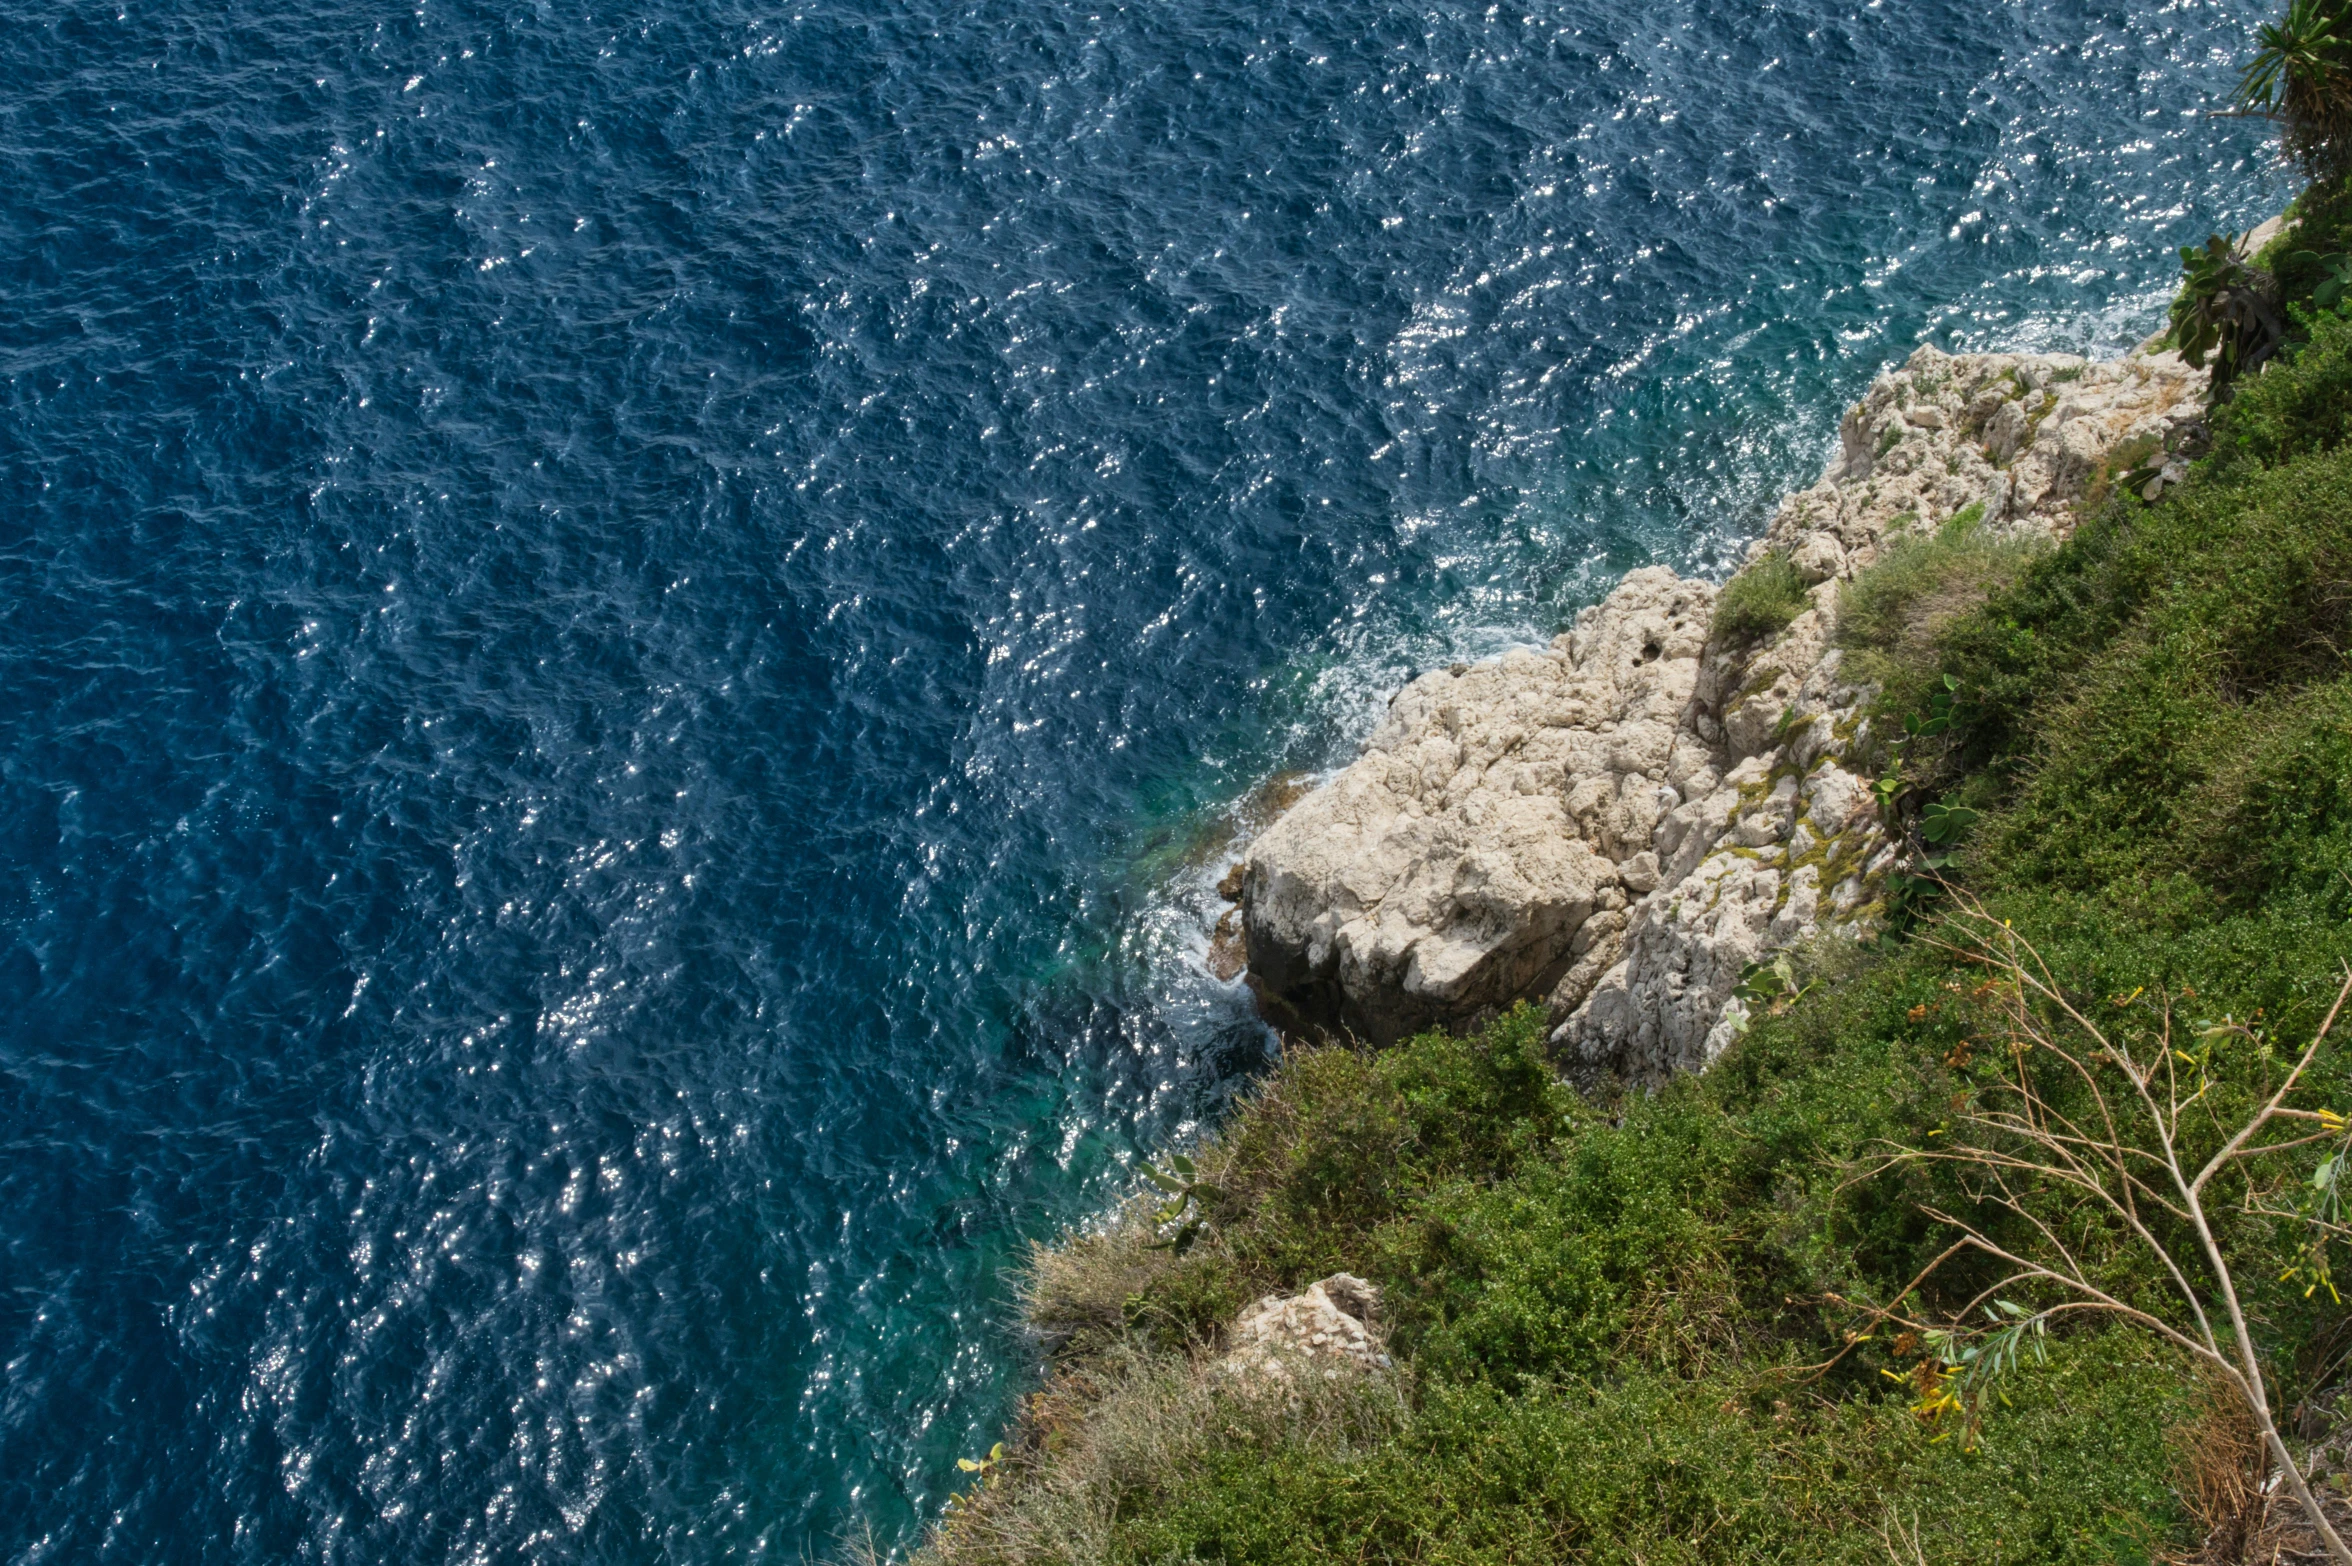 a cliff side near a body of water